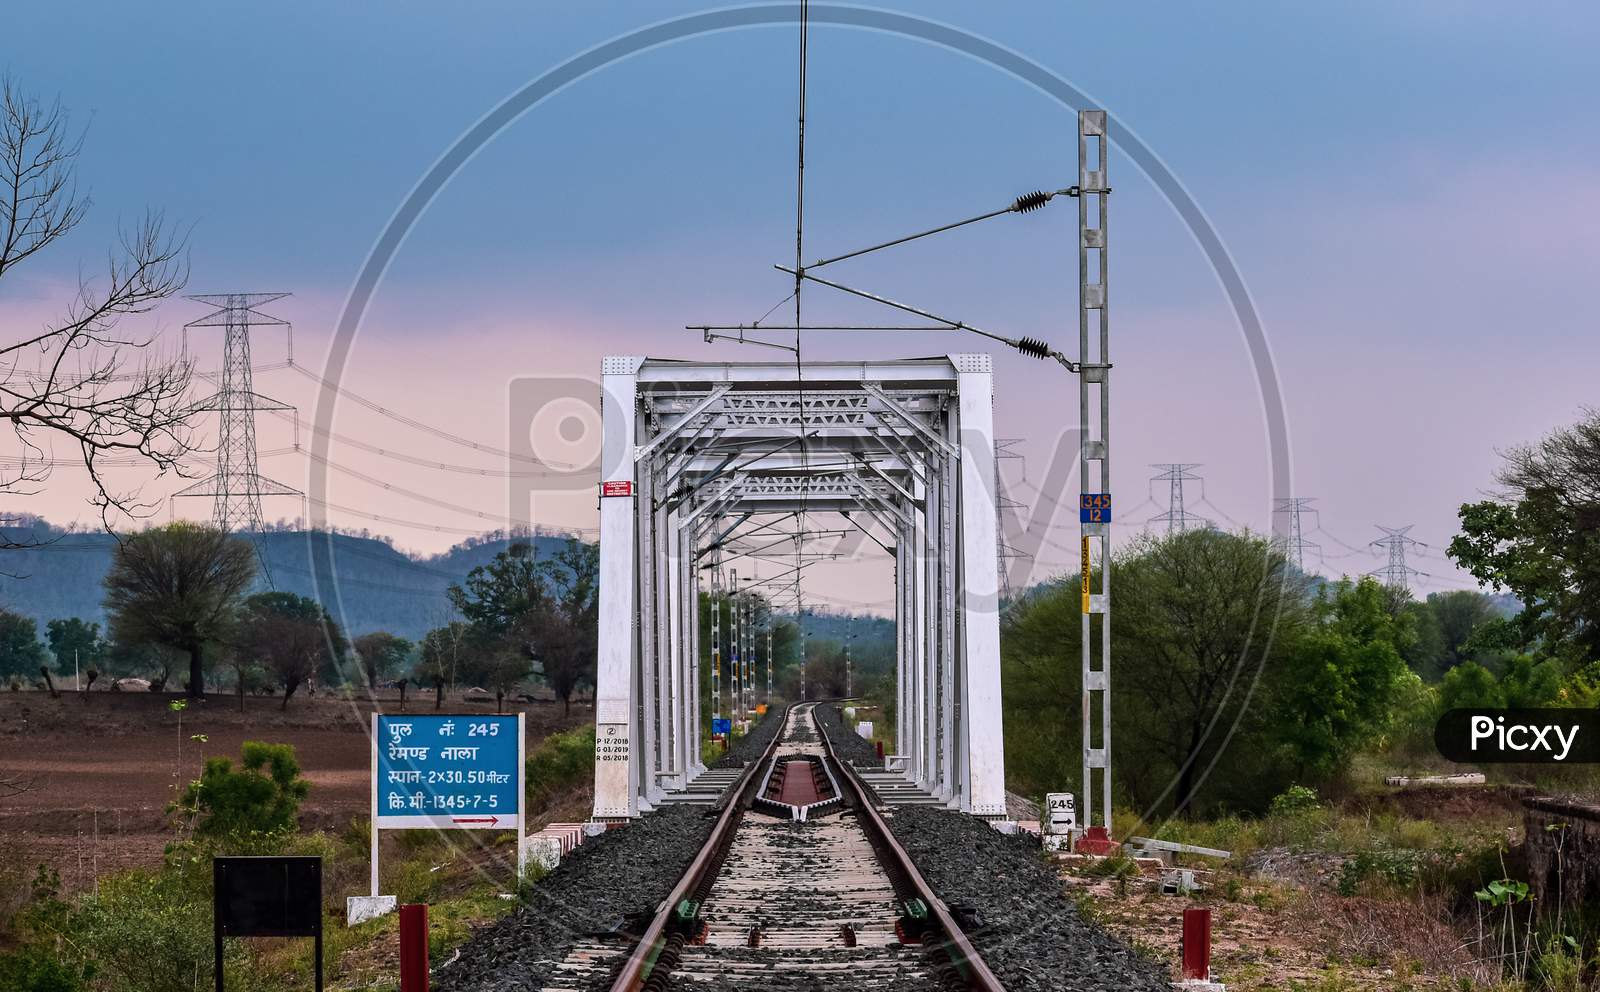 The iron pole bridge for Indian railways with electric polls